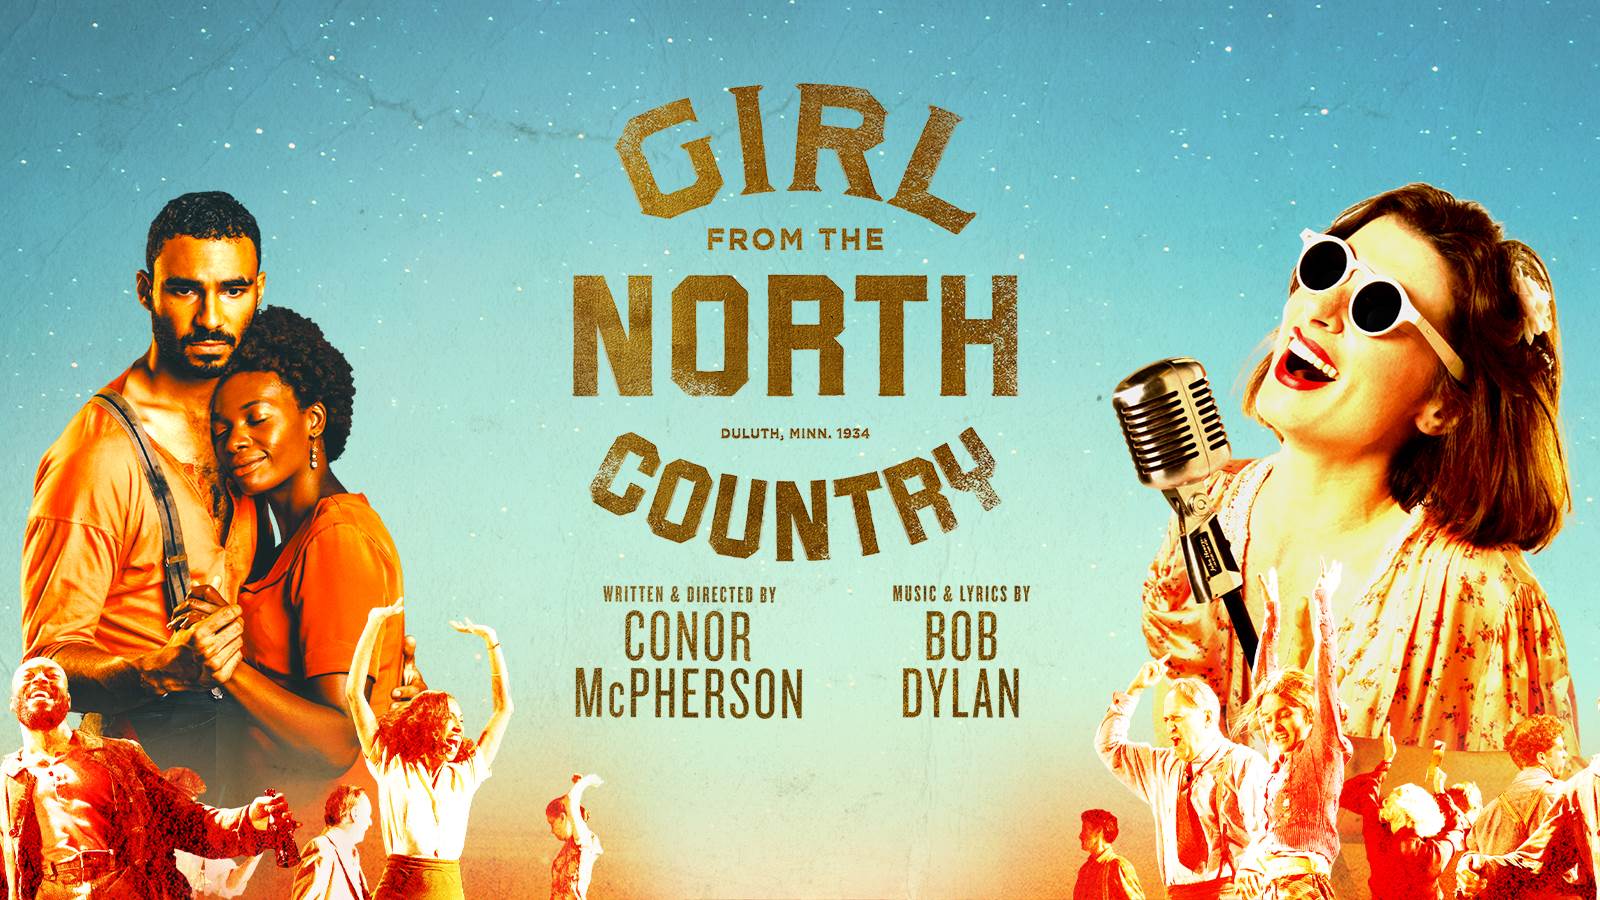 https://www.kennedy-center.org/globalassets/whats-on/genre/theater/2023-2024/girl-from-the-north-country/2324_theater_event_images_1600x900_10_girl-from-the-north-country.jpg?width=1600&quality=70